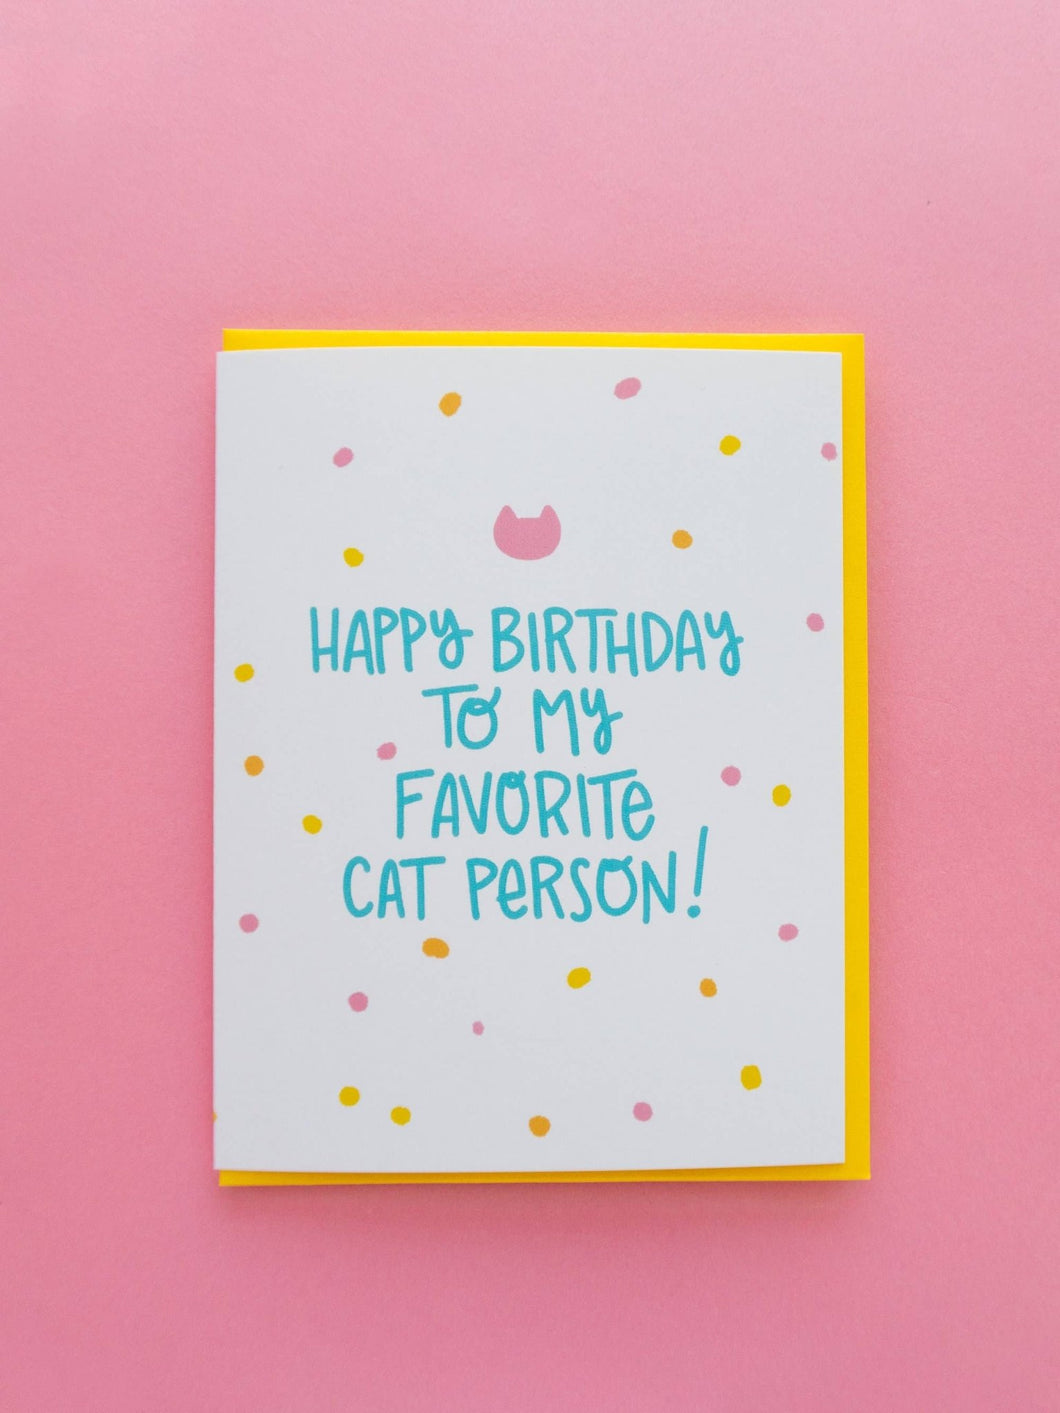 My Favorite Cat Person Card